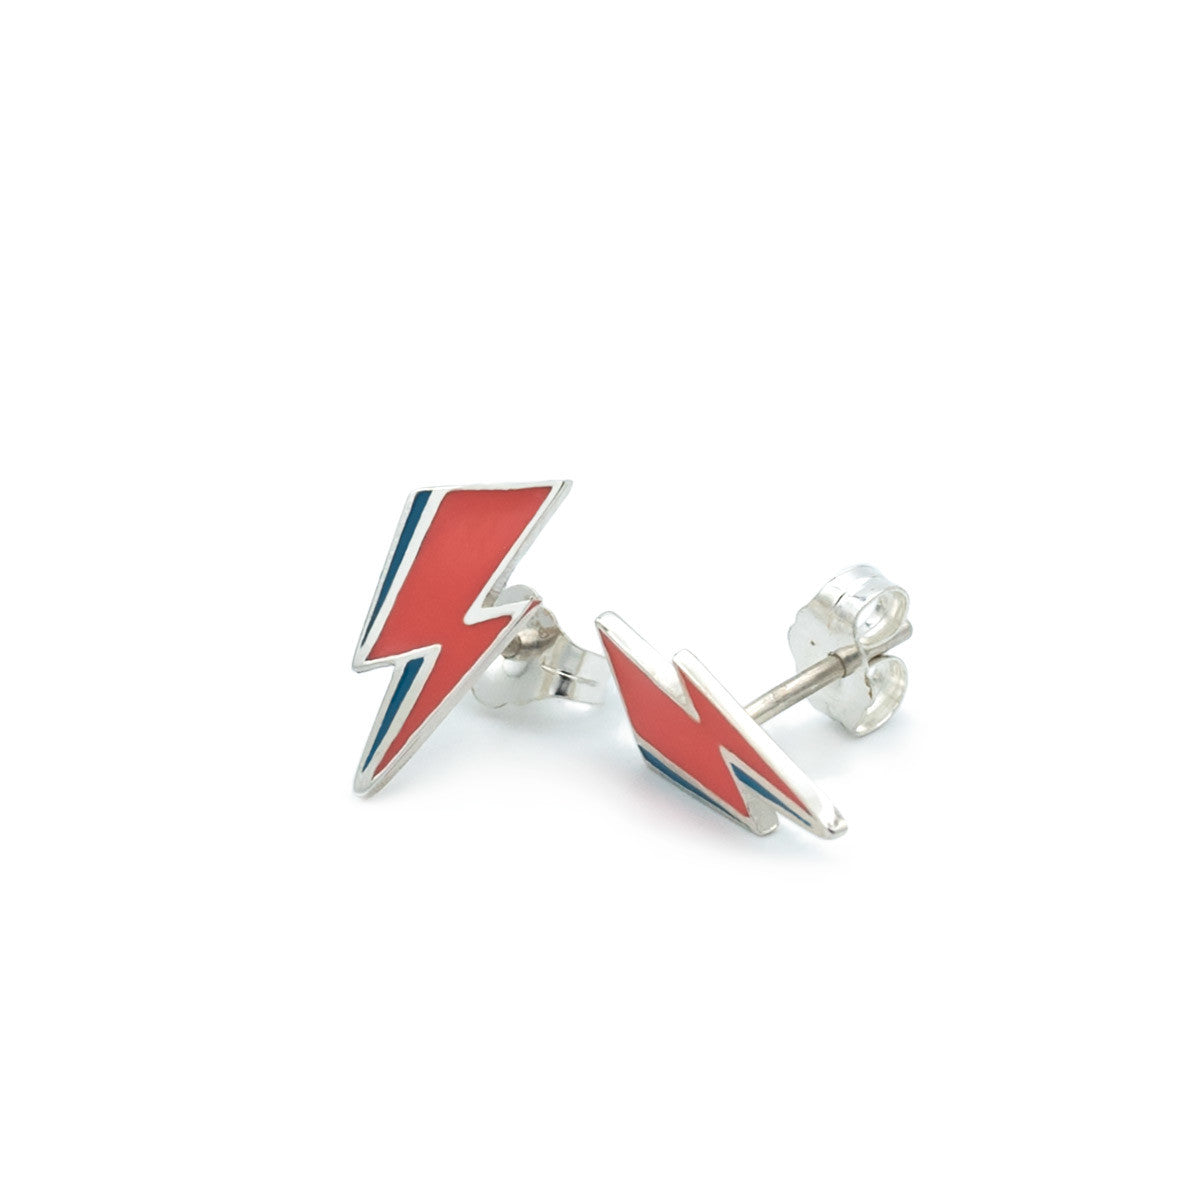 Mini lightning bolt earring studs in sterling silver inspired by Bowie